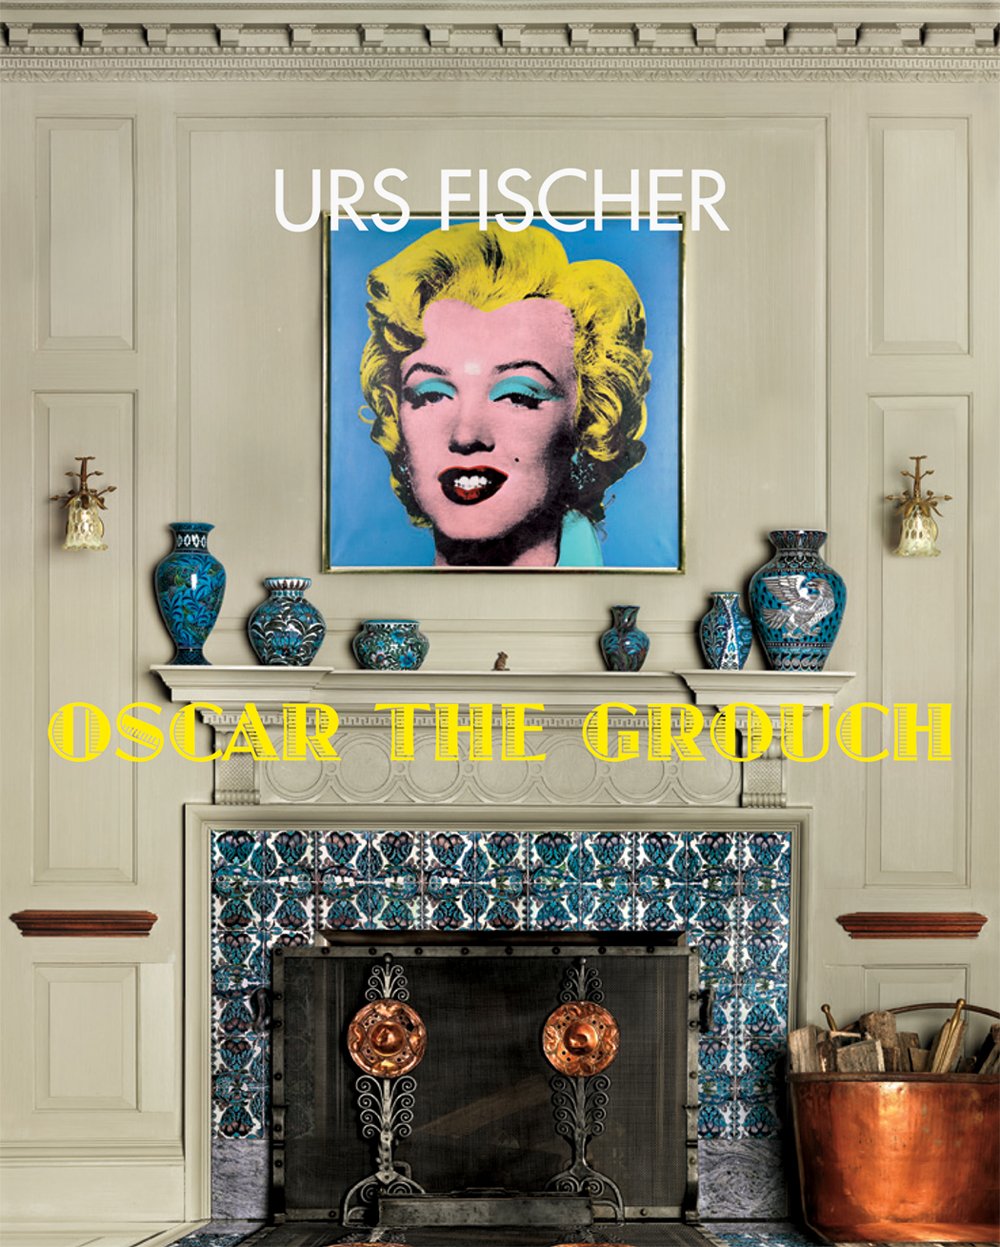 Urs Fischer Oscar the Grouch - The Brant Foundation Shop